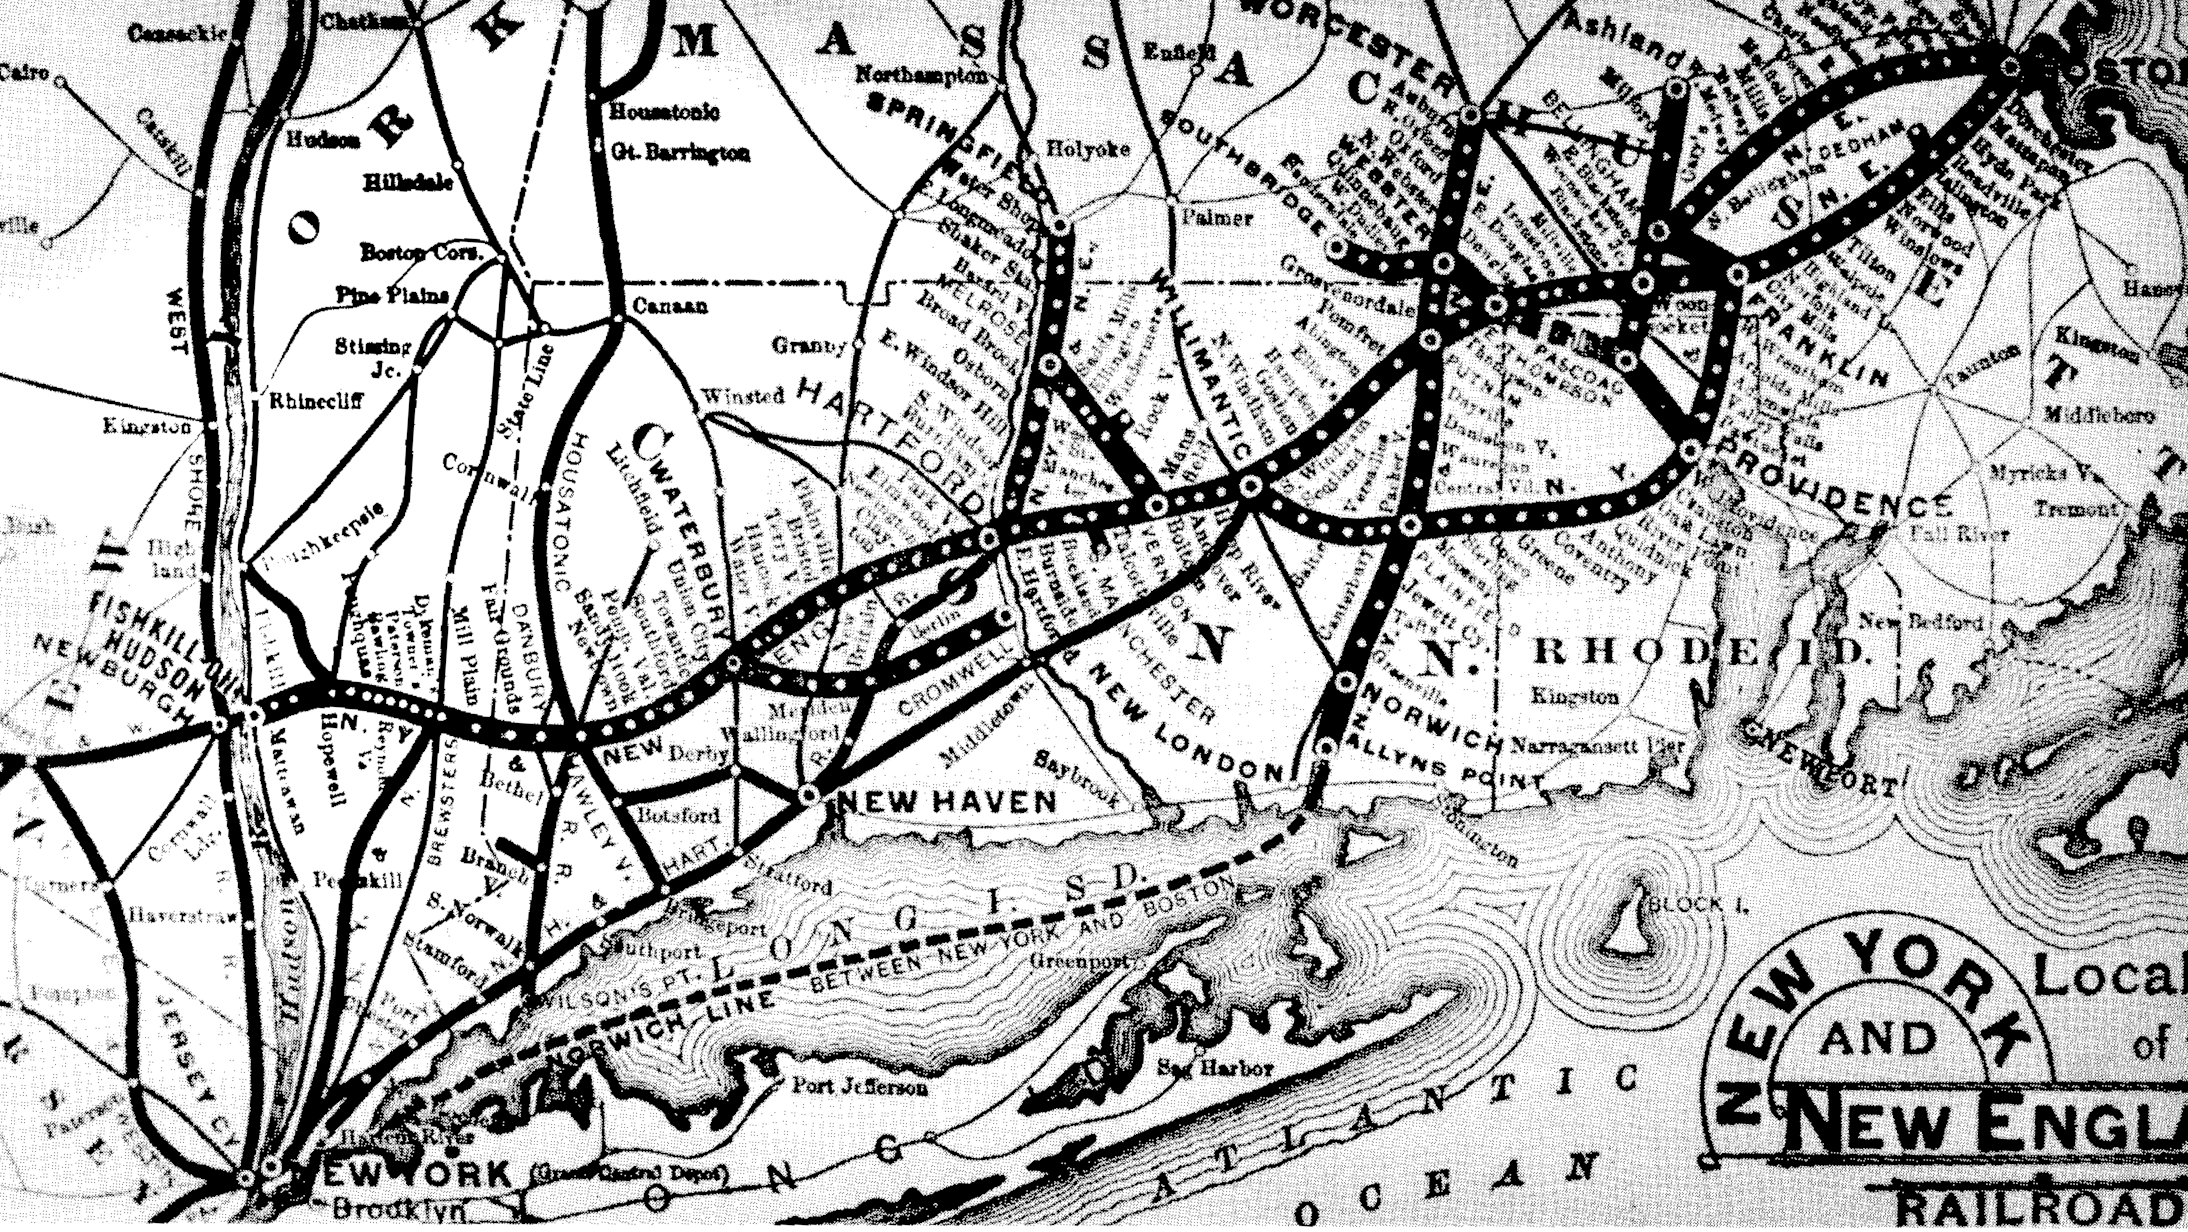 A map of the line, produced by the NY&NE railway